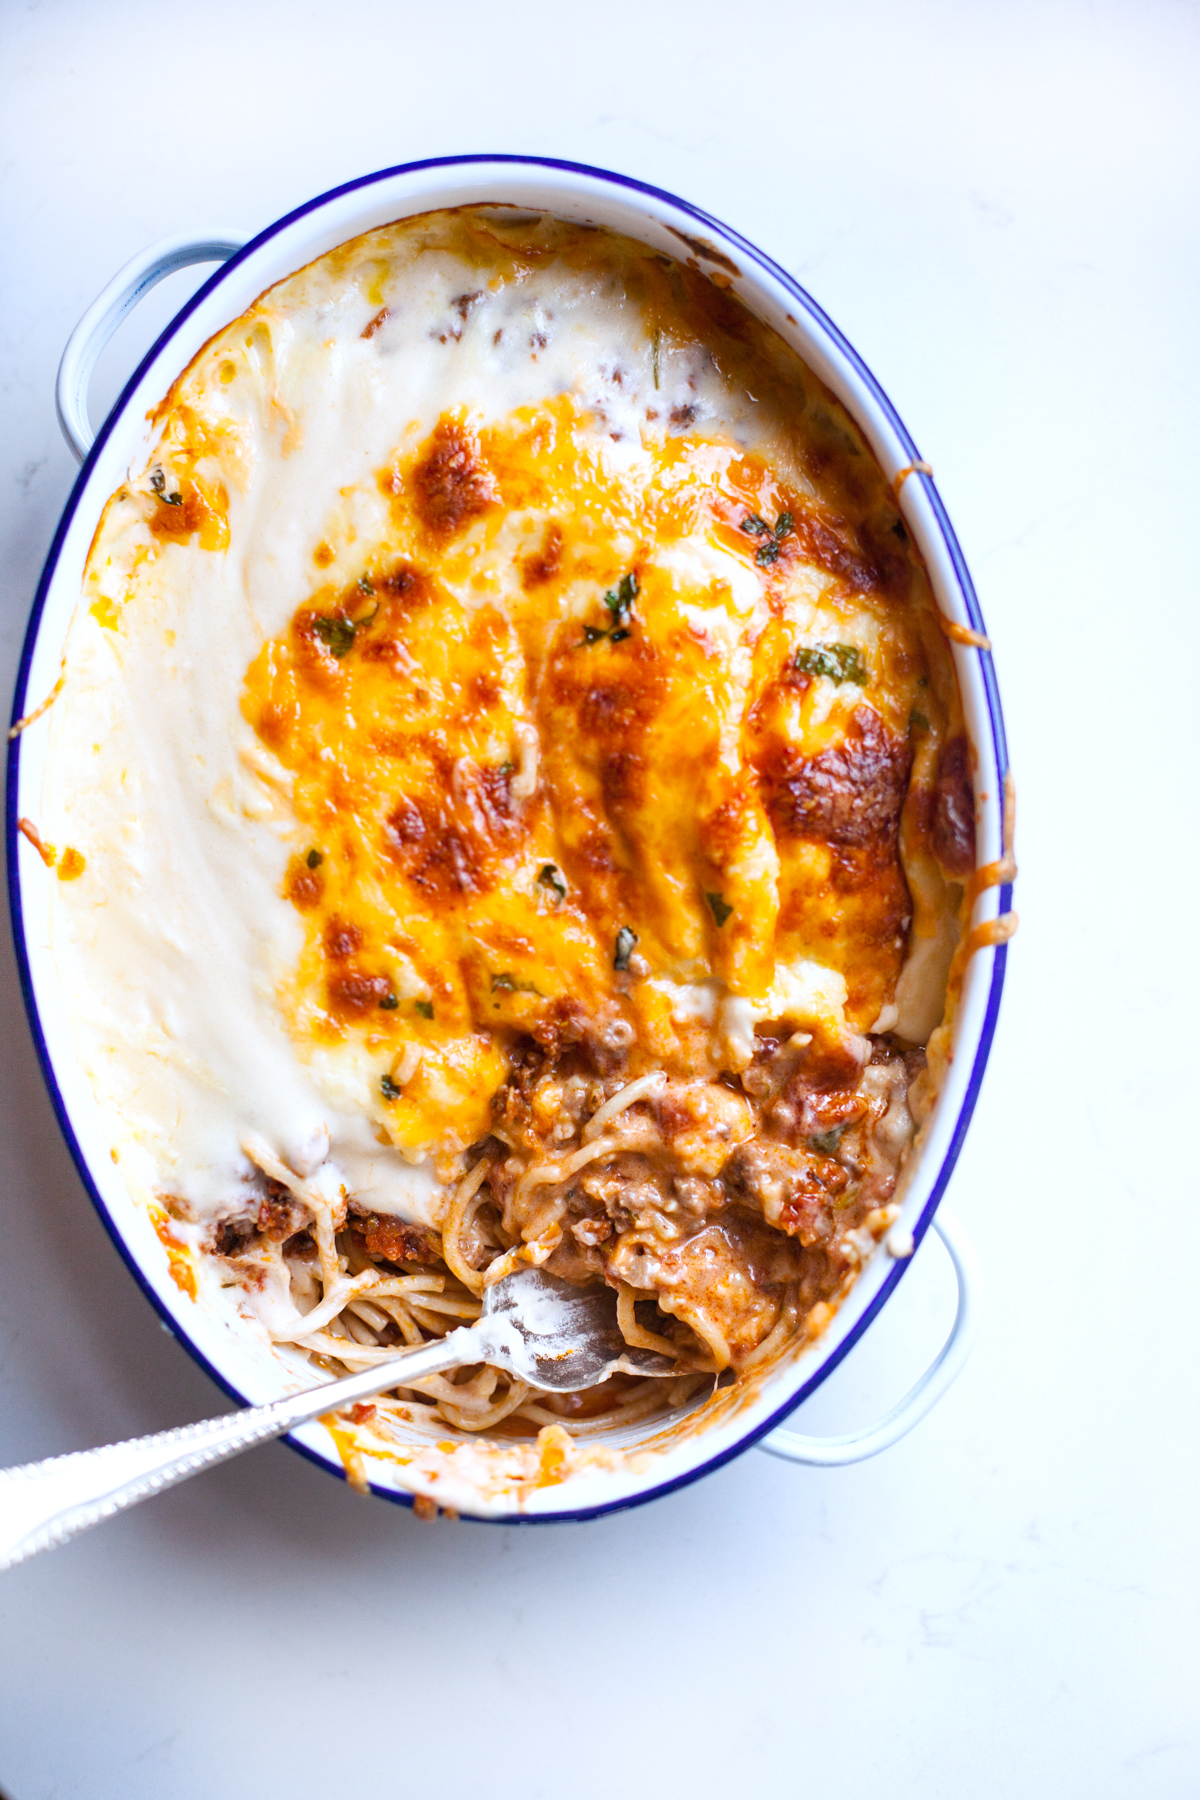 Fancy spaghetti bolognaise with grilled creamy cheese sauce on top - so damn delicious 